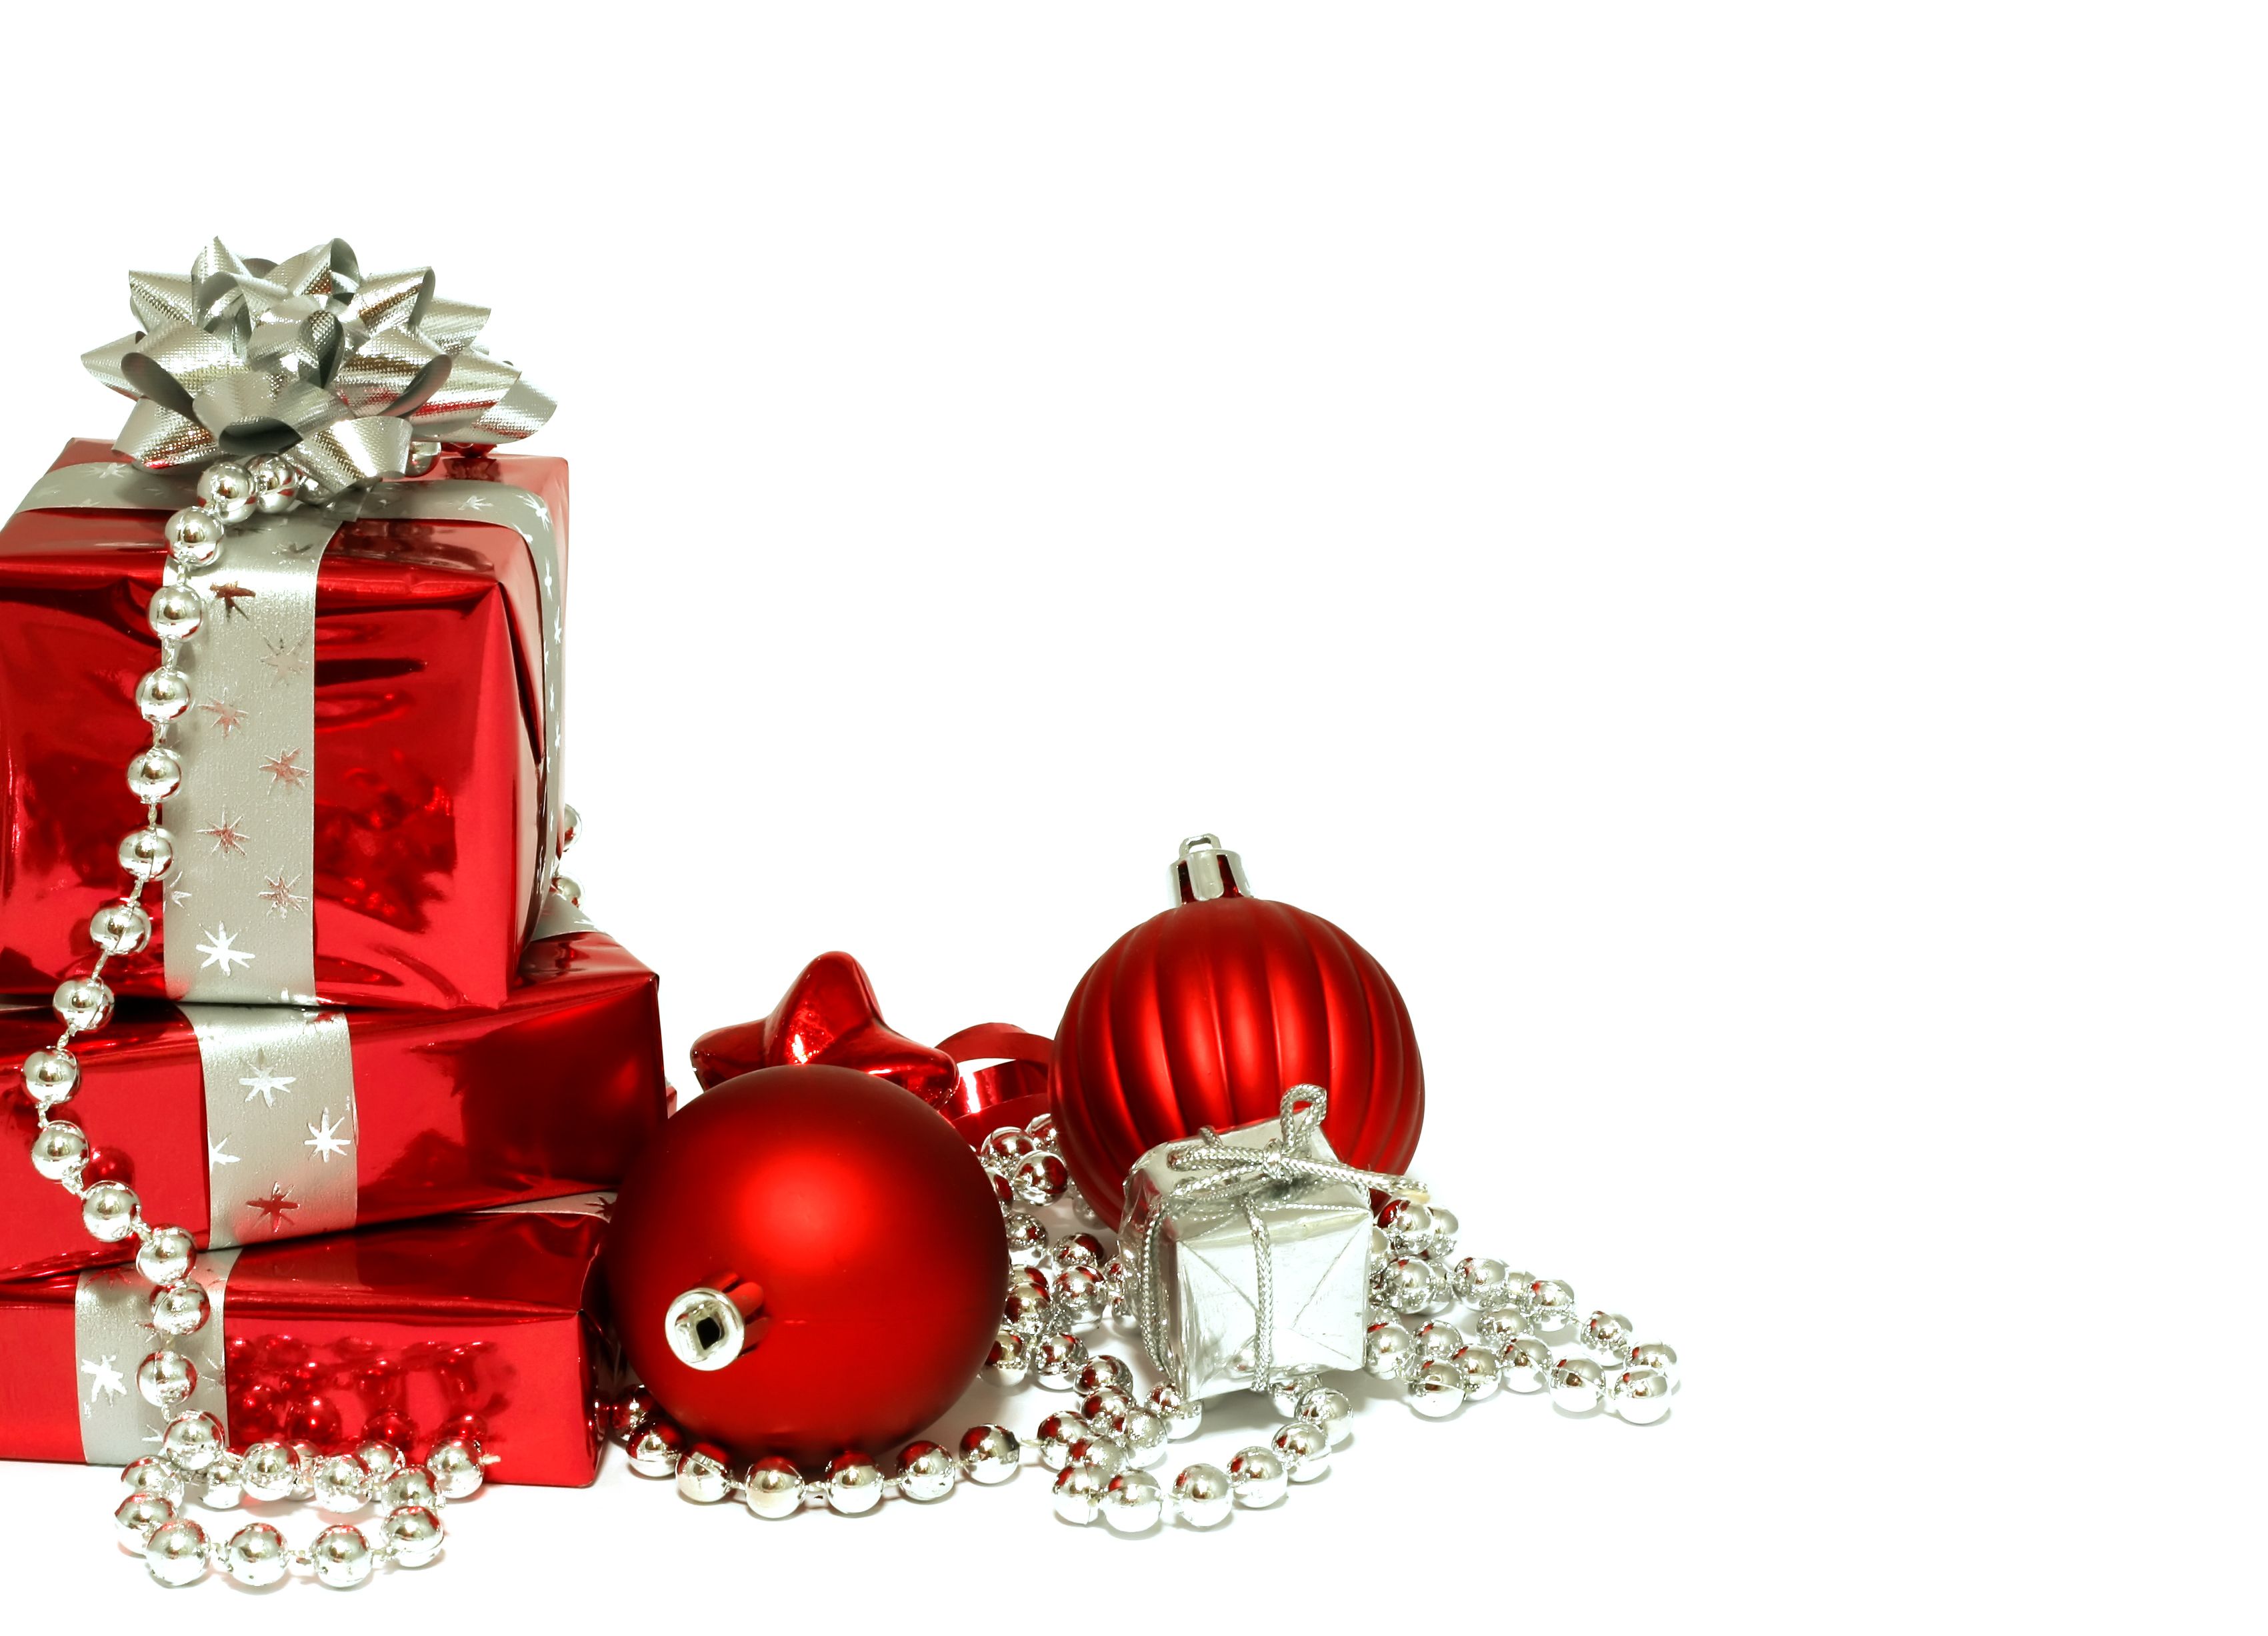 Red and white christmas wallpaper | Wallpaper Wide HD